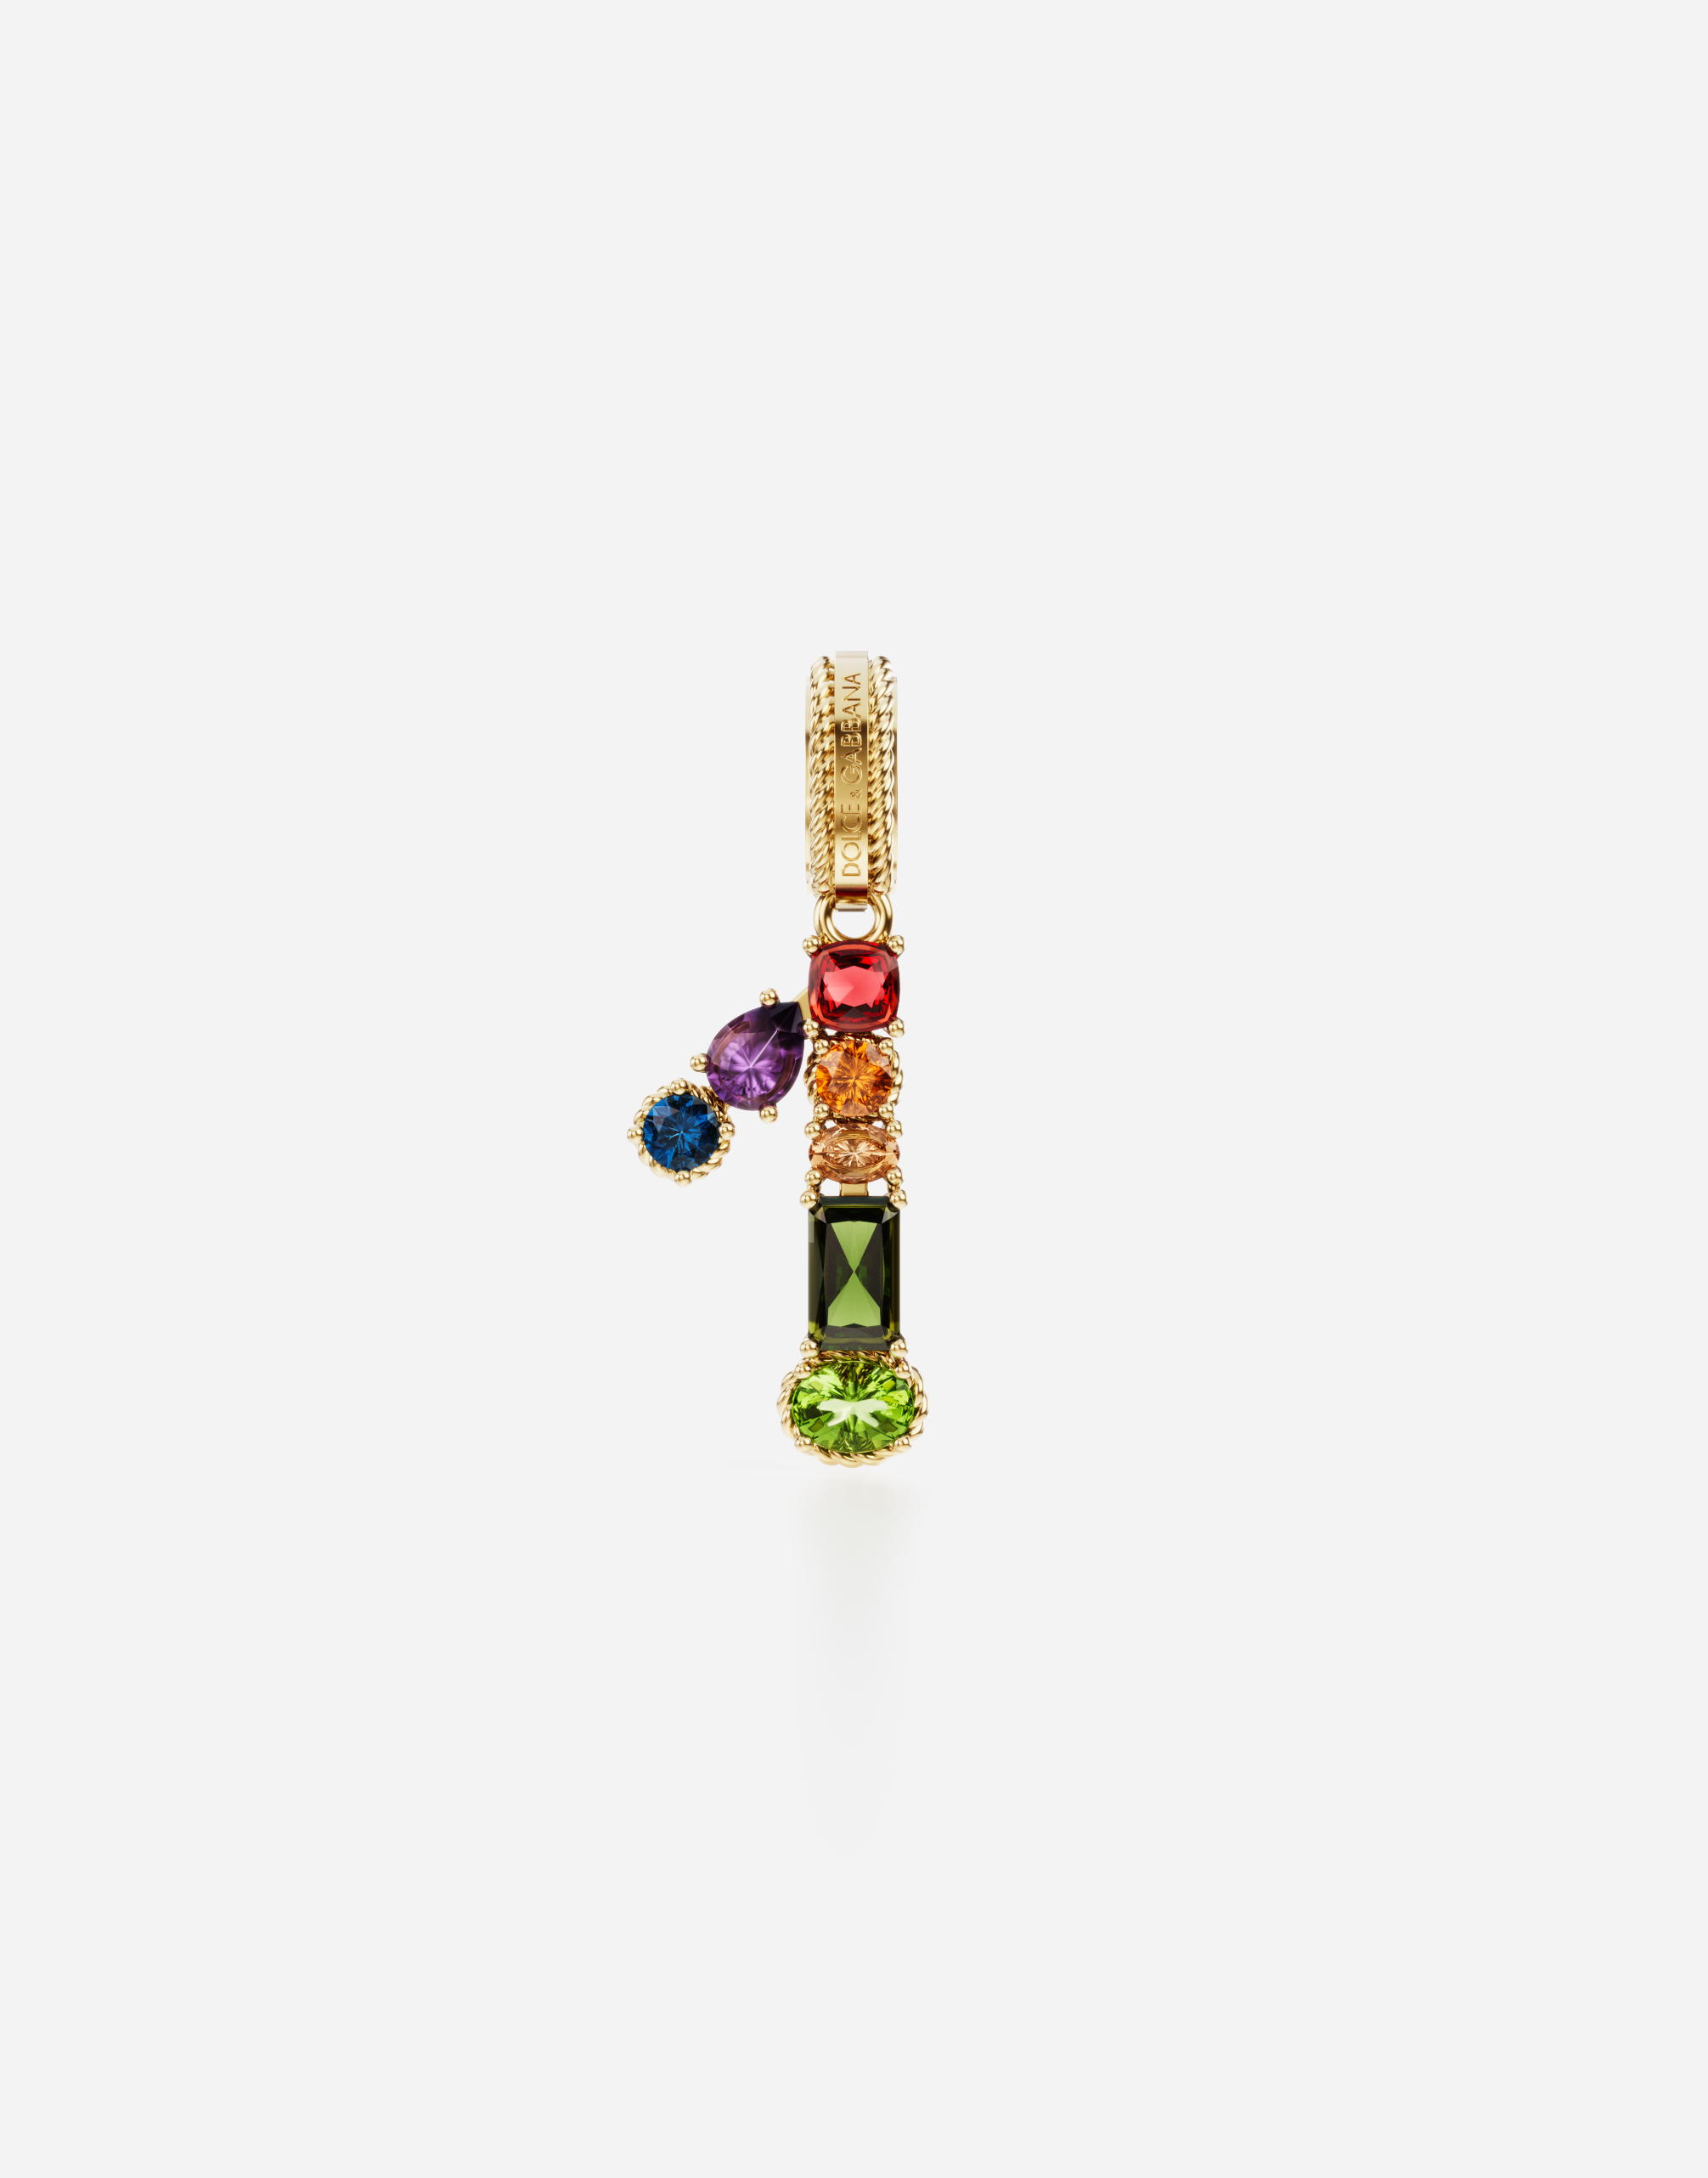 18 kt yellow gold rainbow pendant  with multicolor finegemstones representing number 1 in Yellow gold